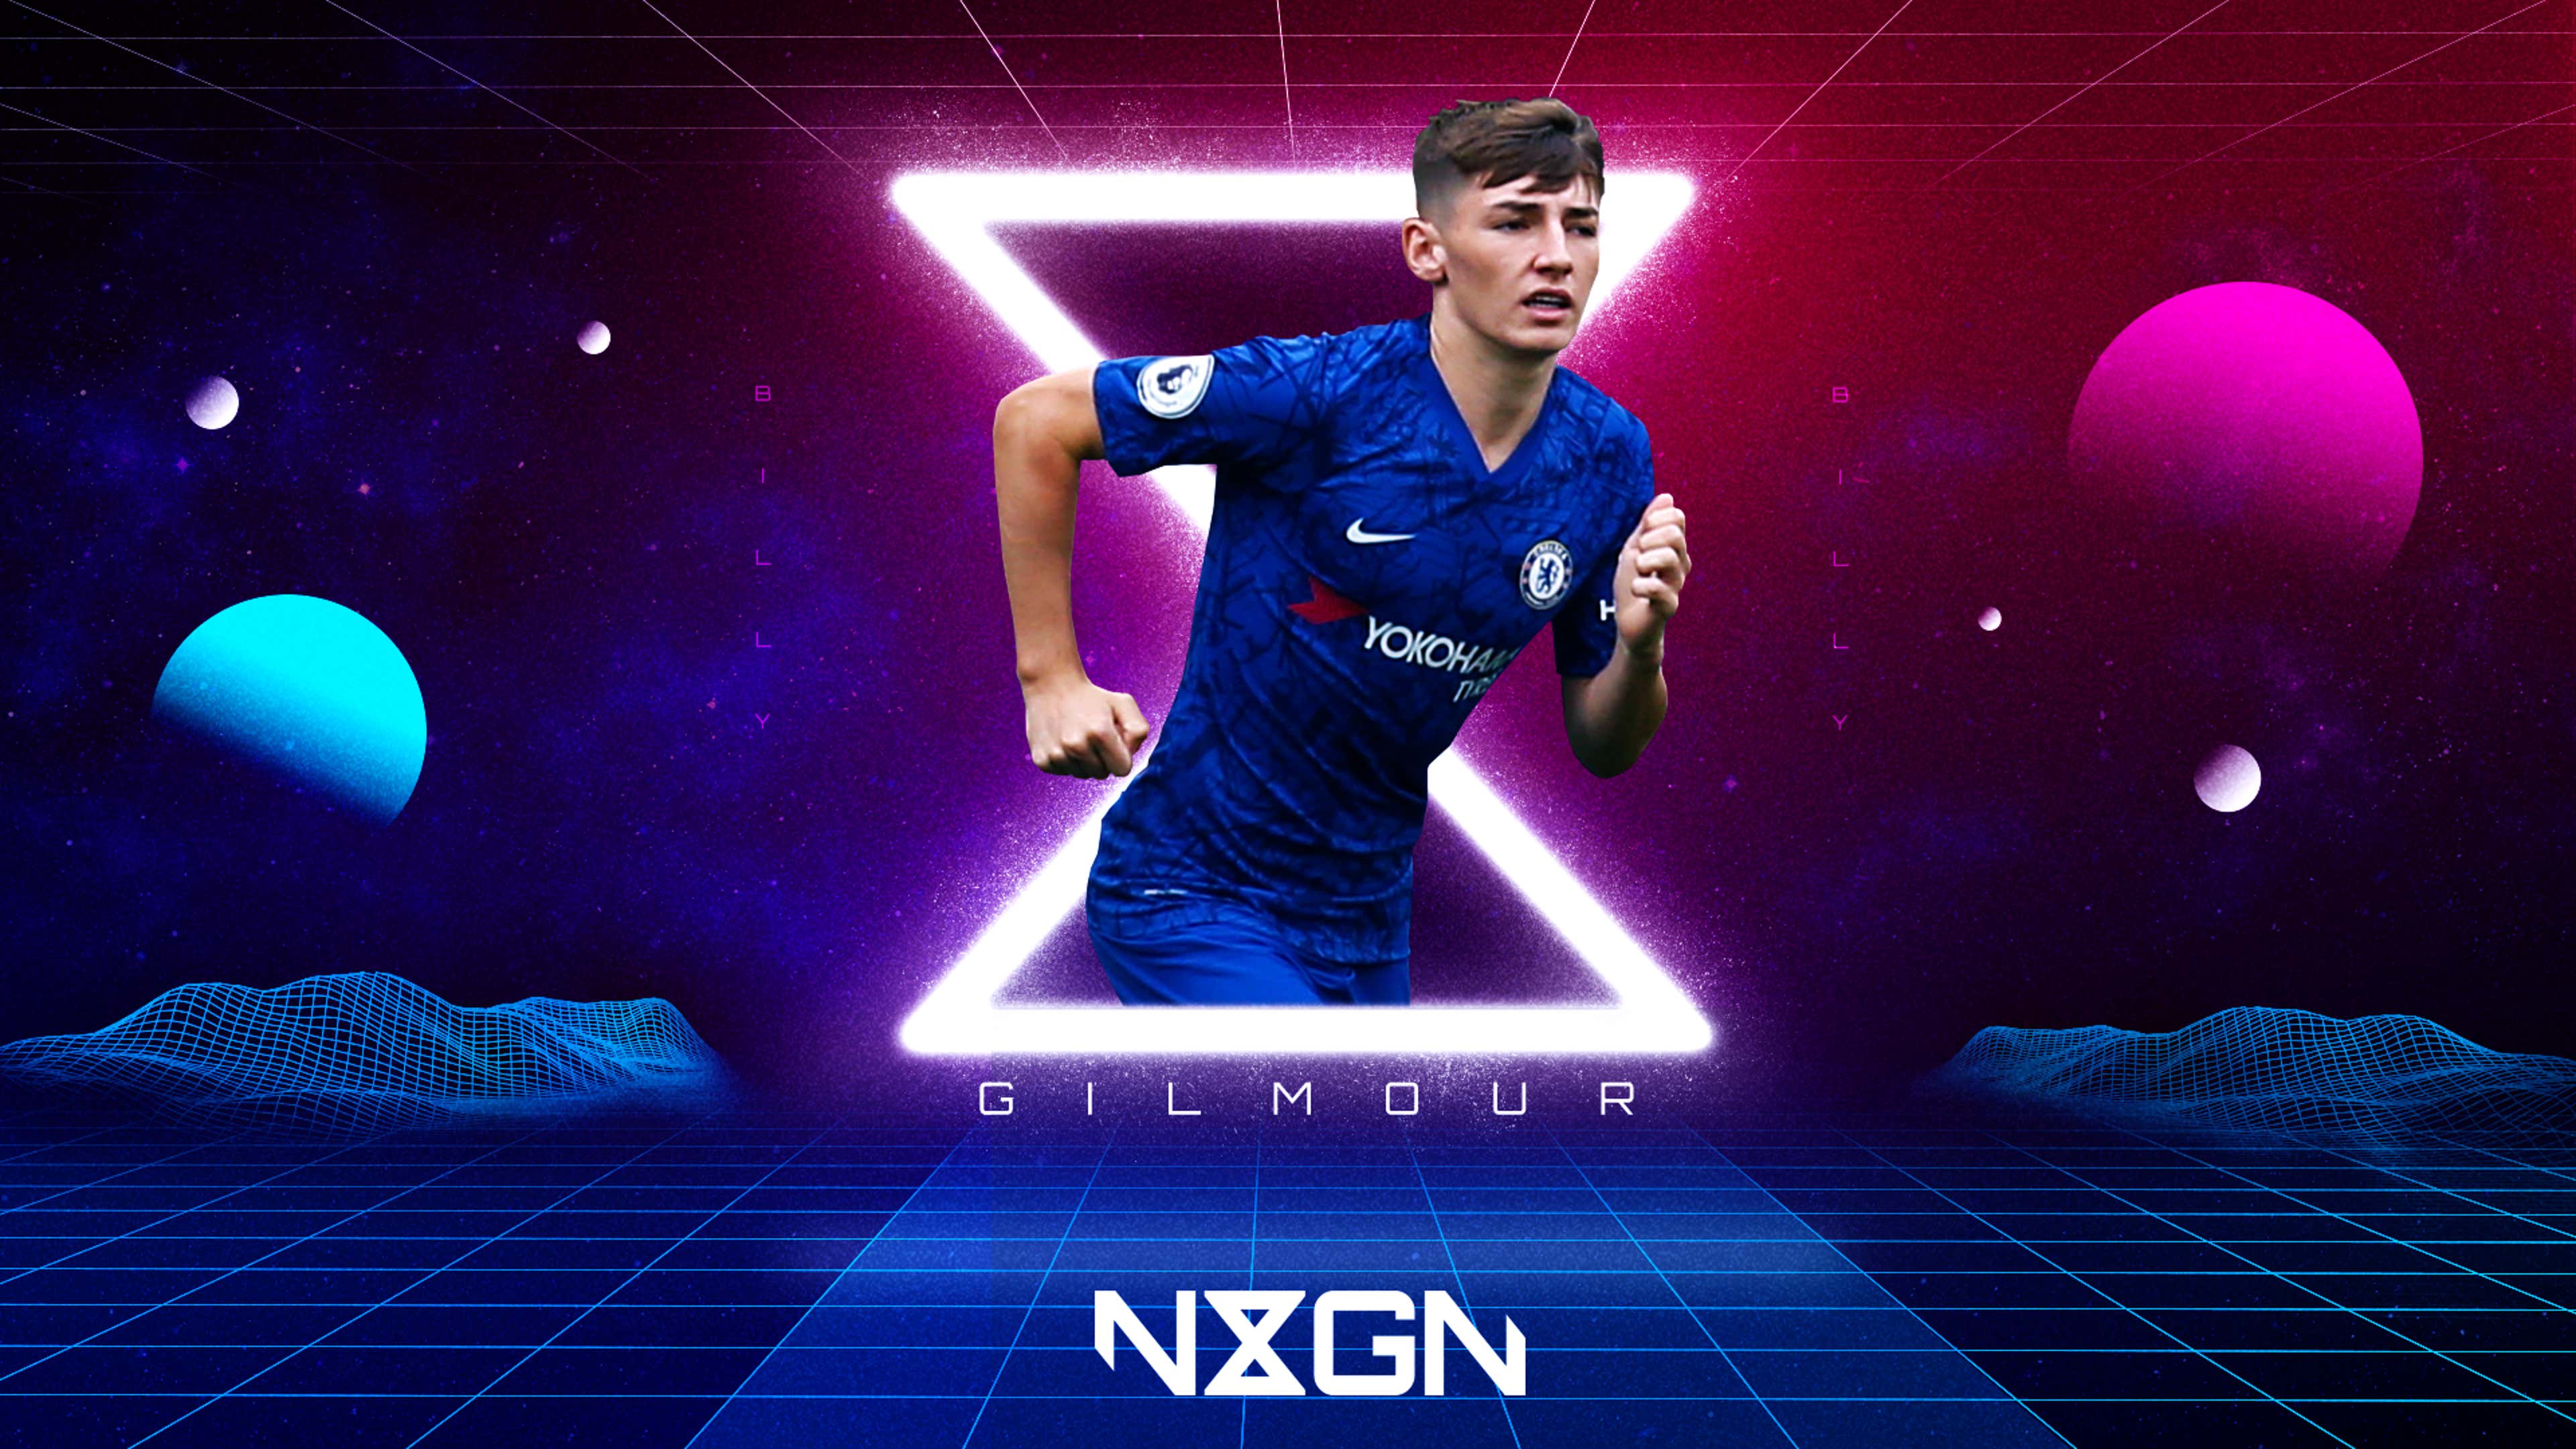 Billy Gilmour NxGn